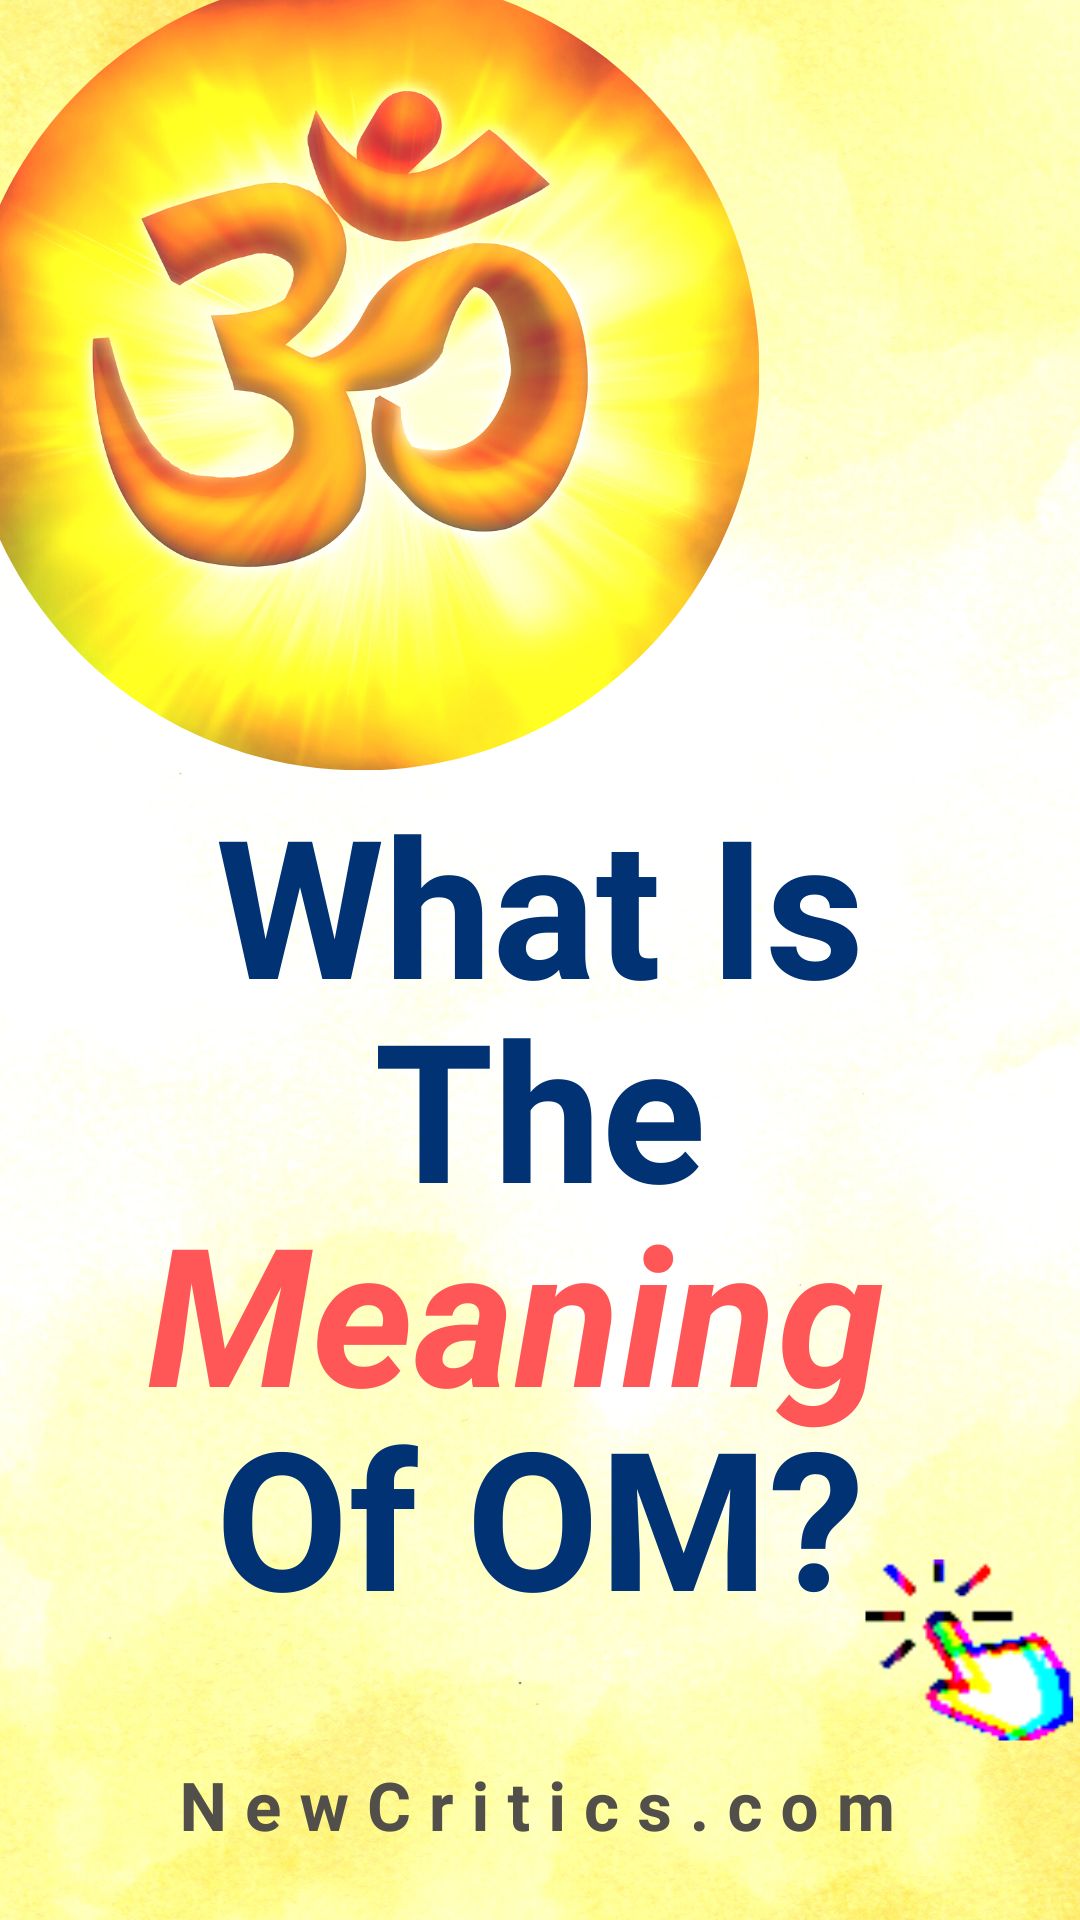 Do You Know The Meaning Of OM / Canva